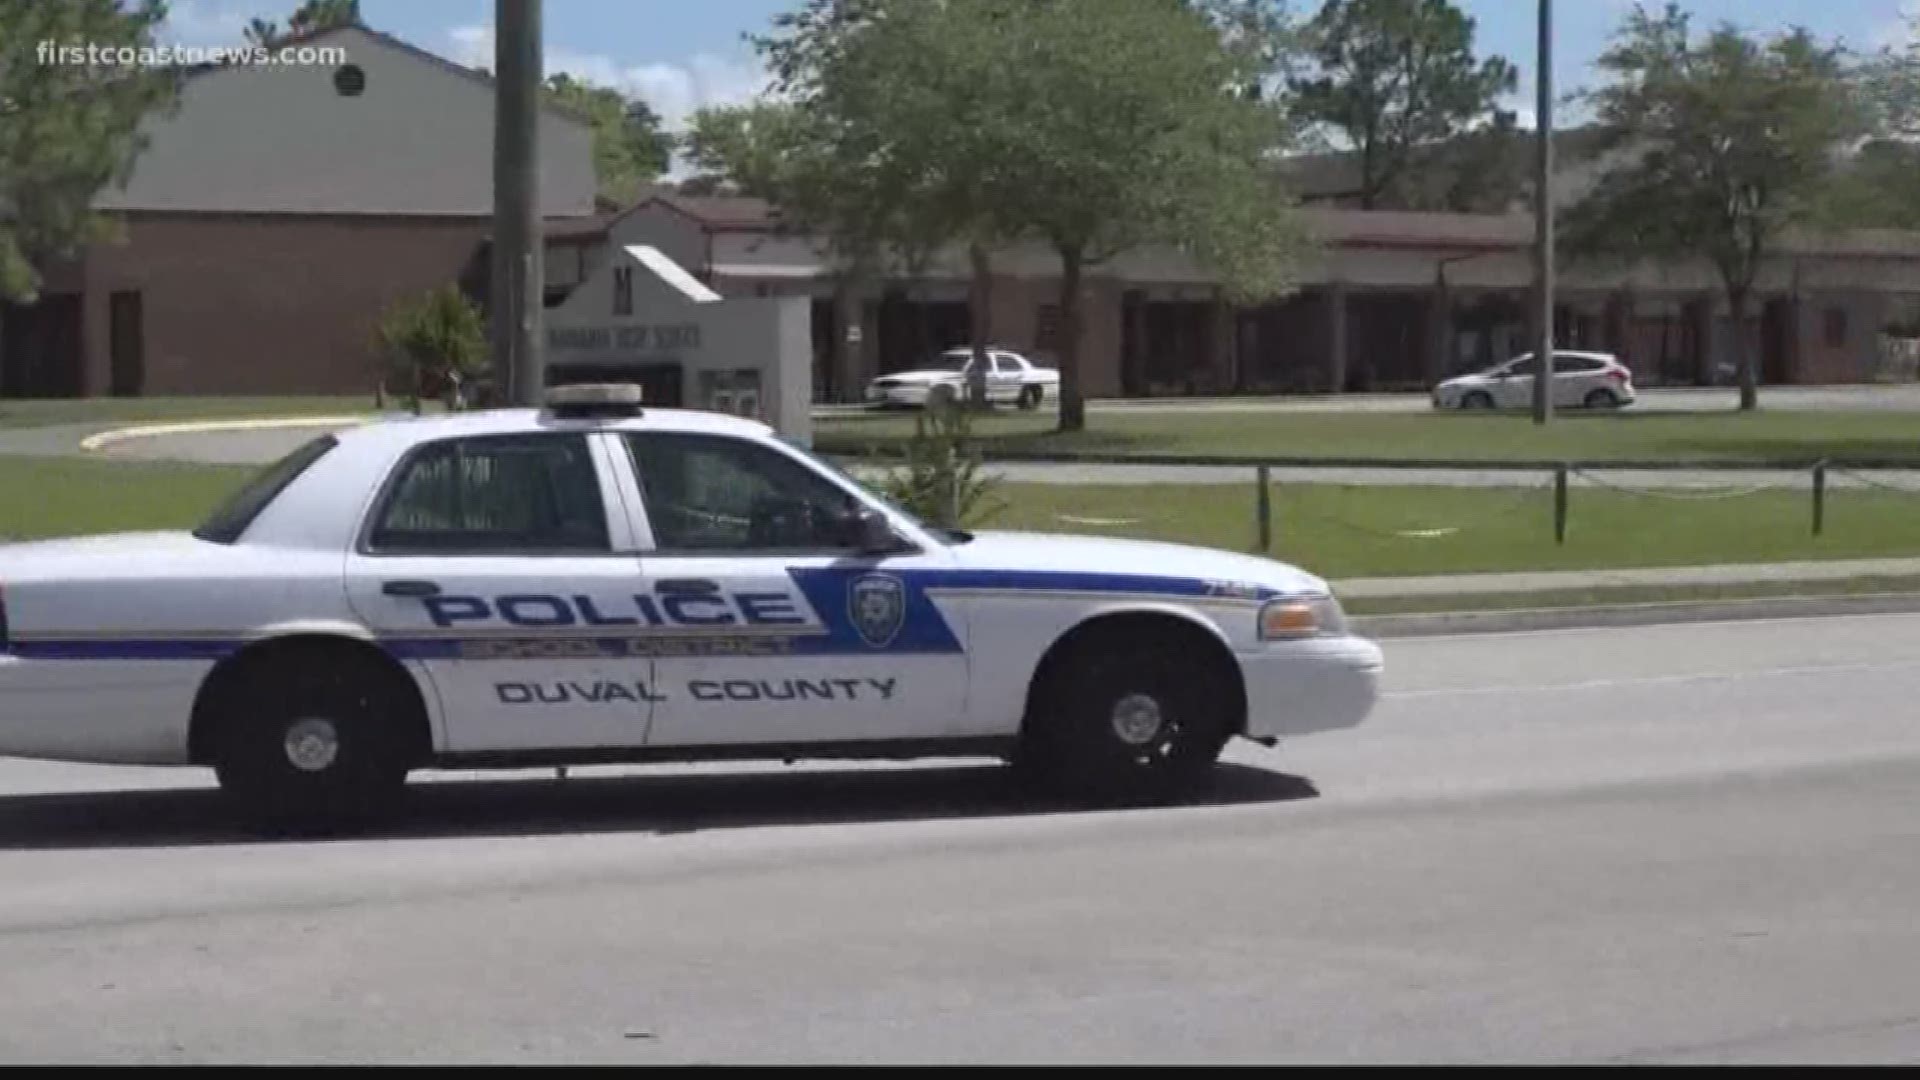 Duval County Public Schools posted on Facebook that police conducted a thorough search of the campus and has been deemed safe.